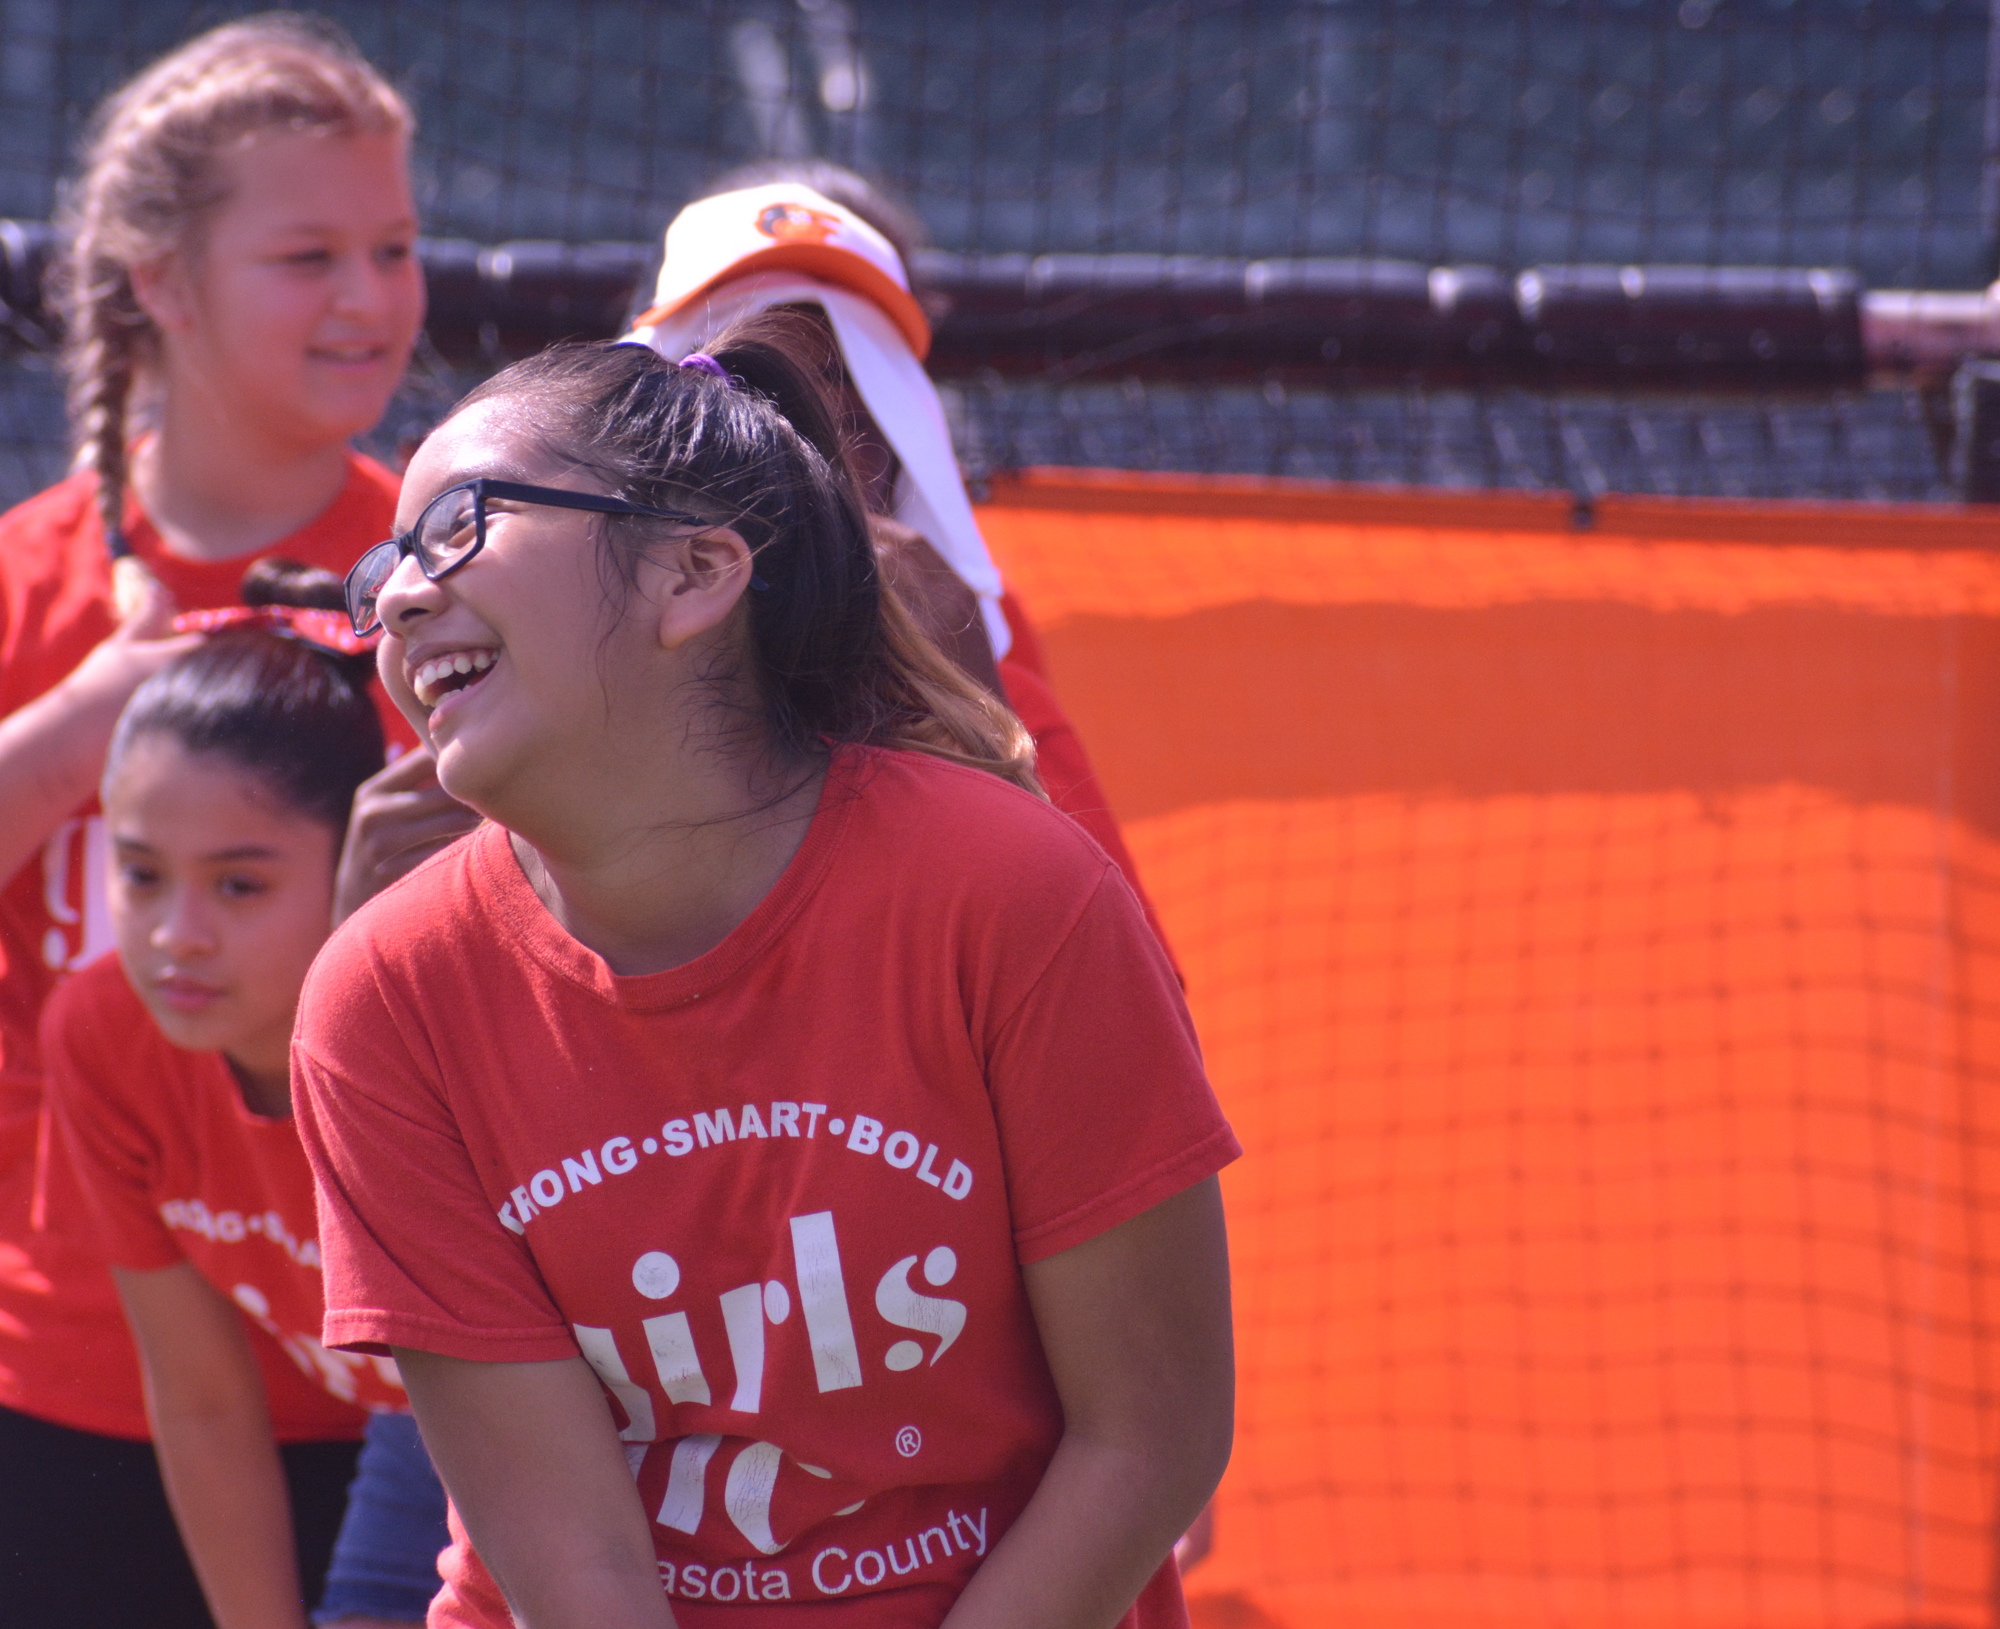 Getzemany laughs after swining at the Orioles Girls Inc. clinic on July 27.